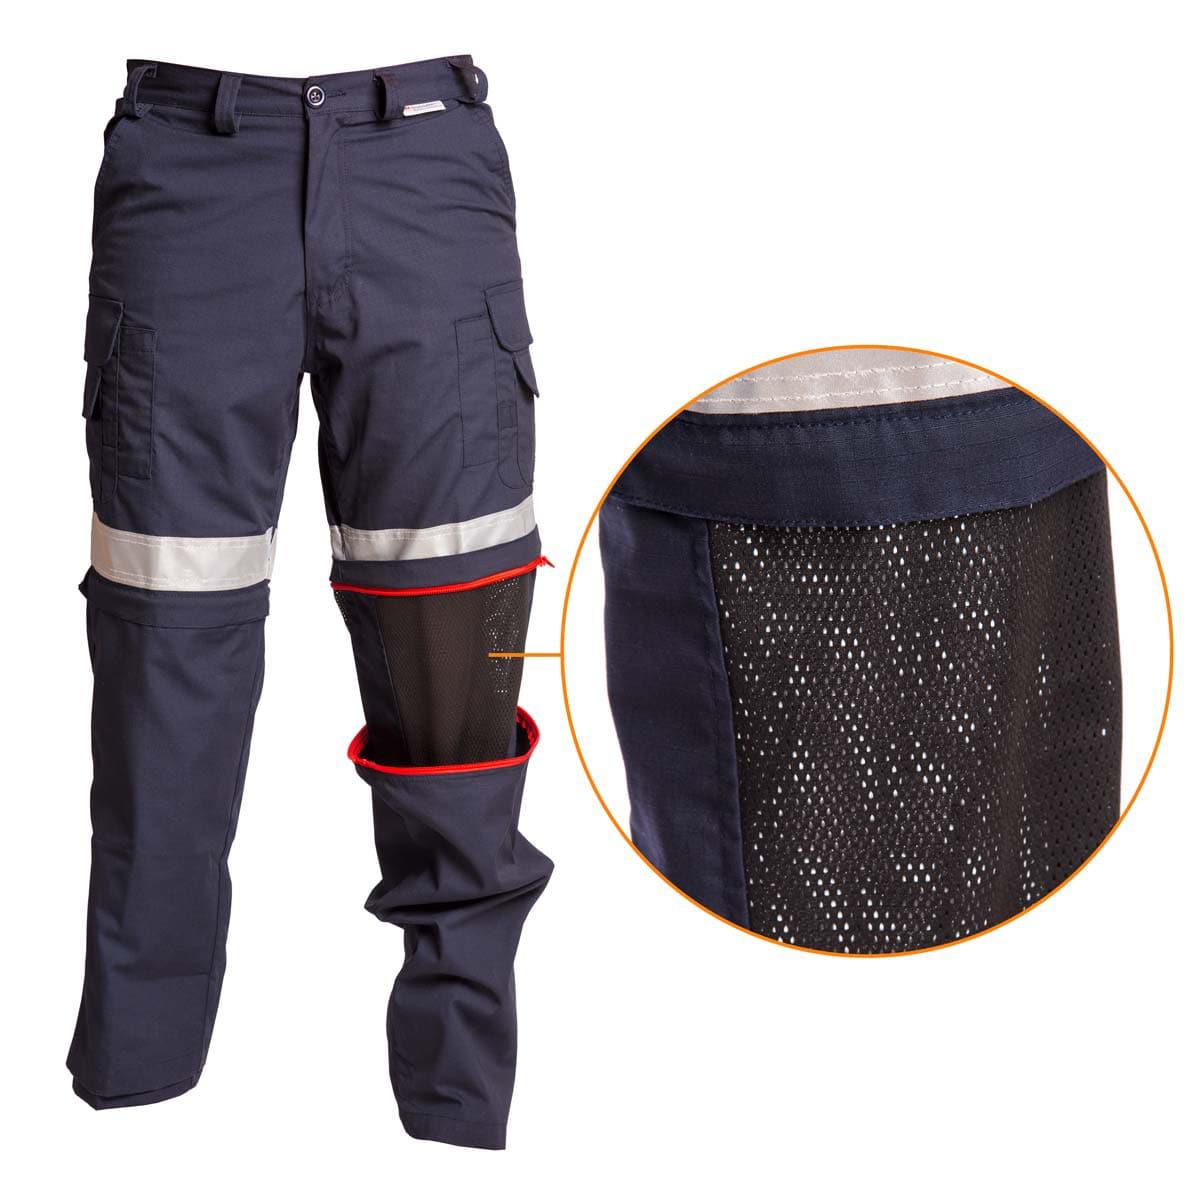 Ventilated Work Pants - CoolWorks